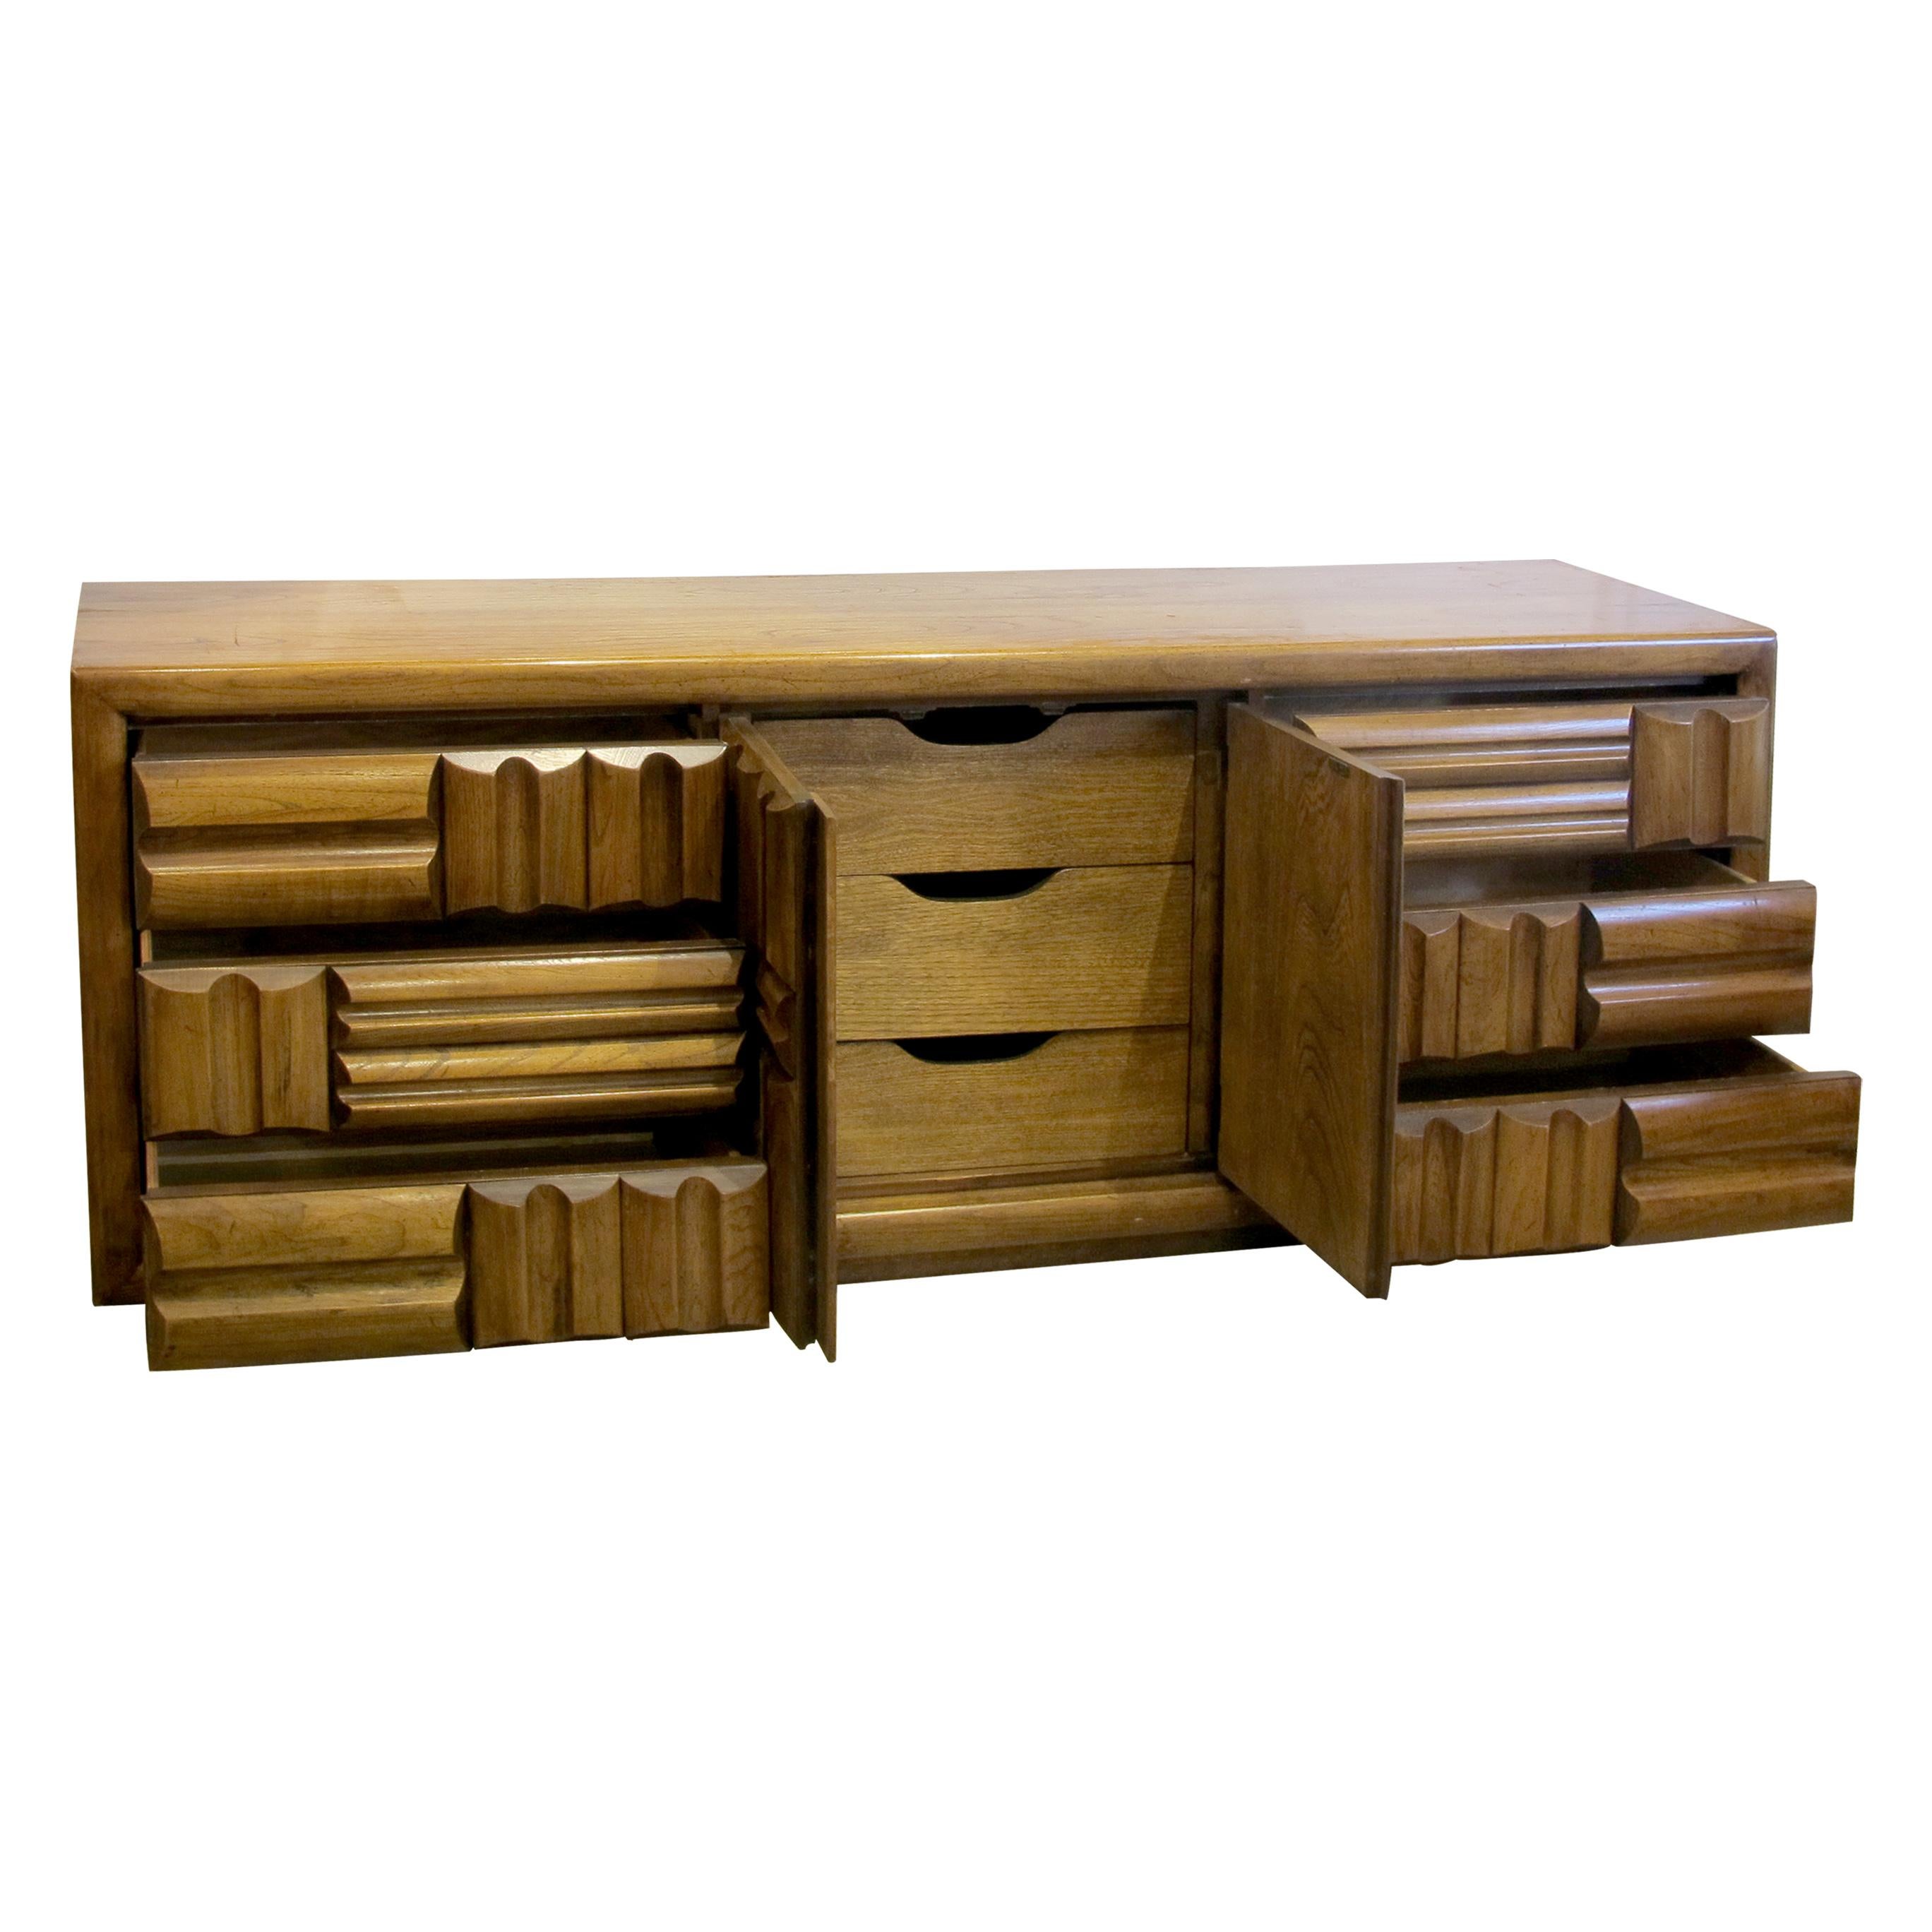 This Lane sideboard is a remarkable piece of furniture that embodies the distinctive characteristics of the Brutalist design. Manufactured by Lane, an esteemed American furniture company, this sideboard showcases the bold and unconventional